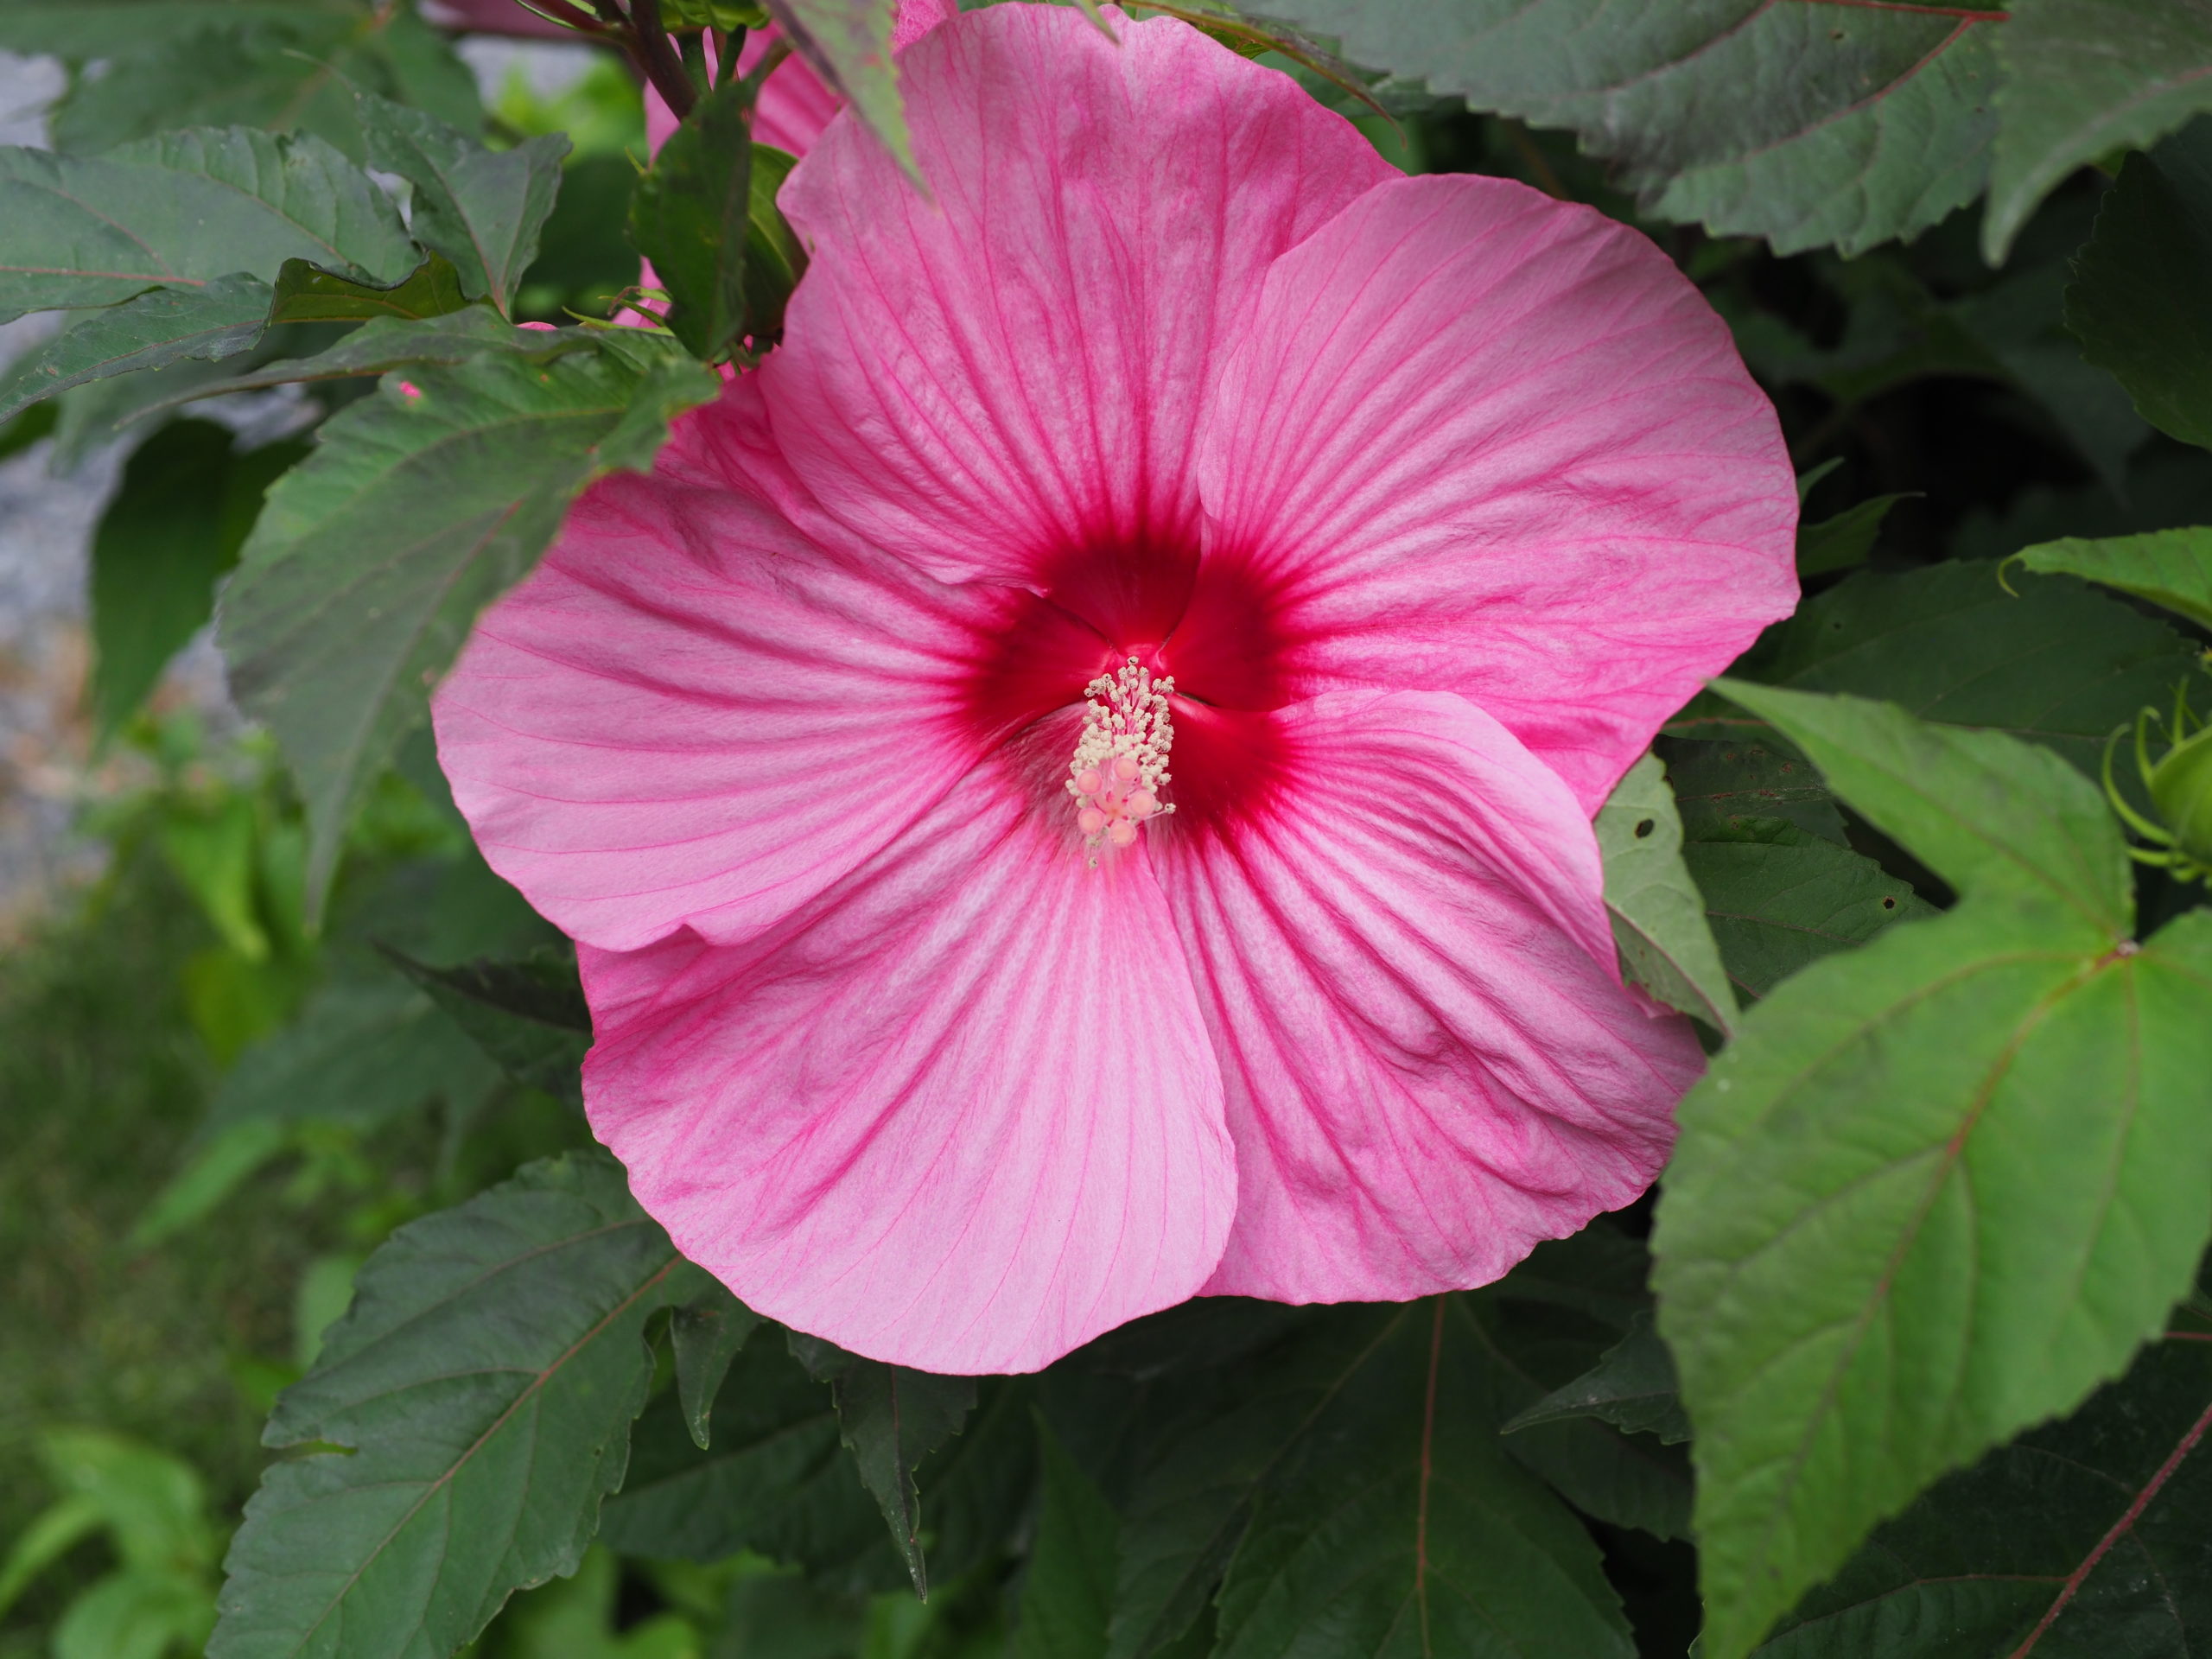 Hibiscus “Brandy Punch” fully open. The perennial flowers for about six weeks and individual flowers can last up to two days.